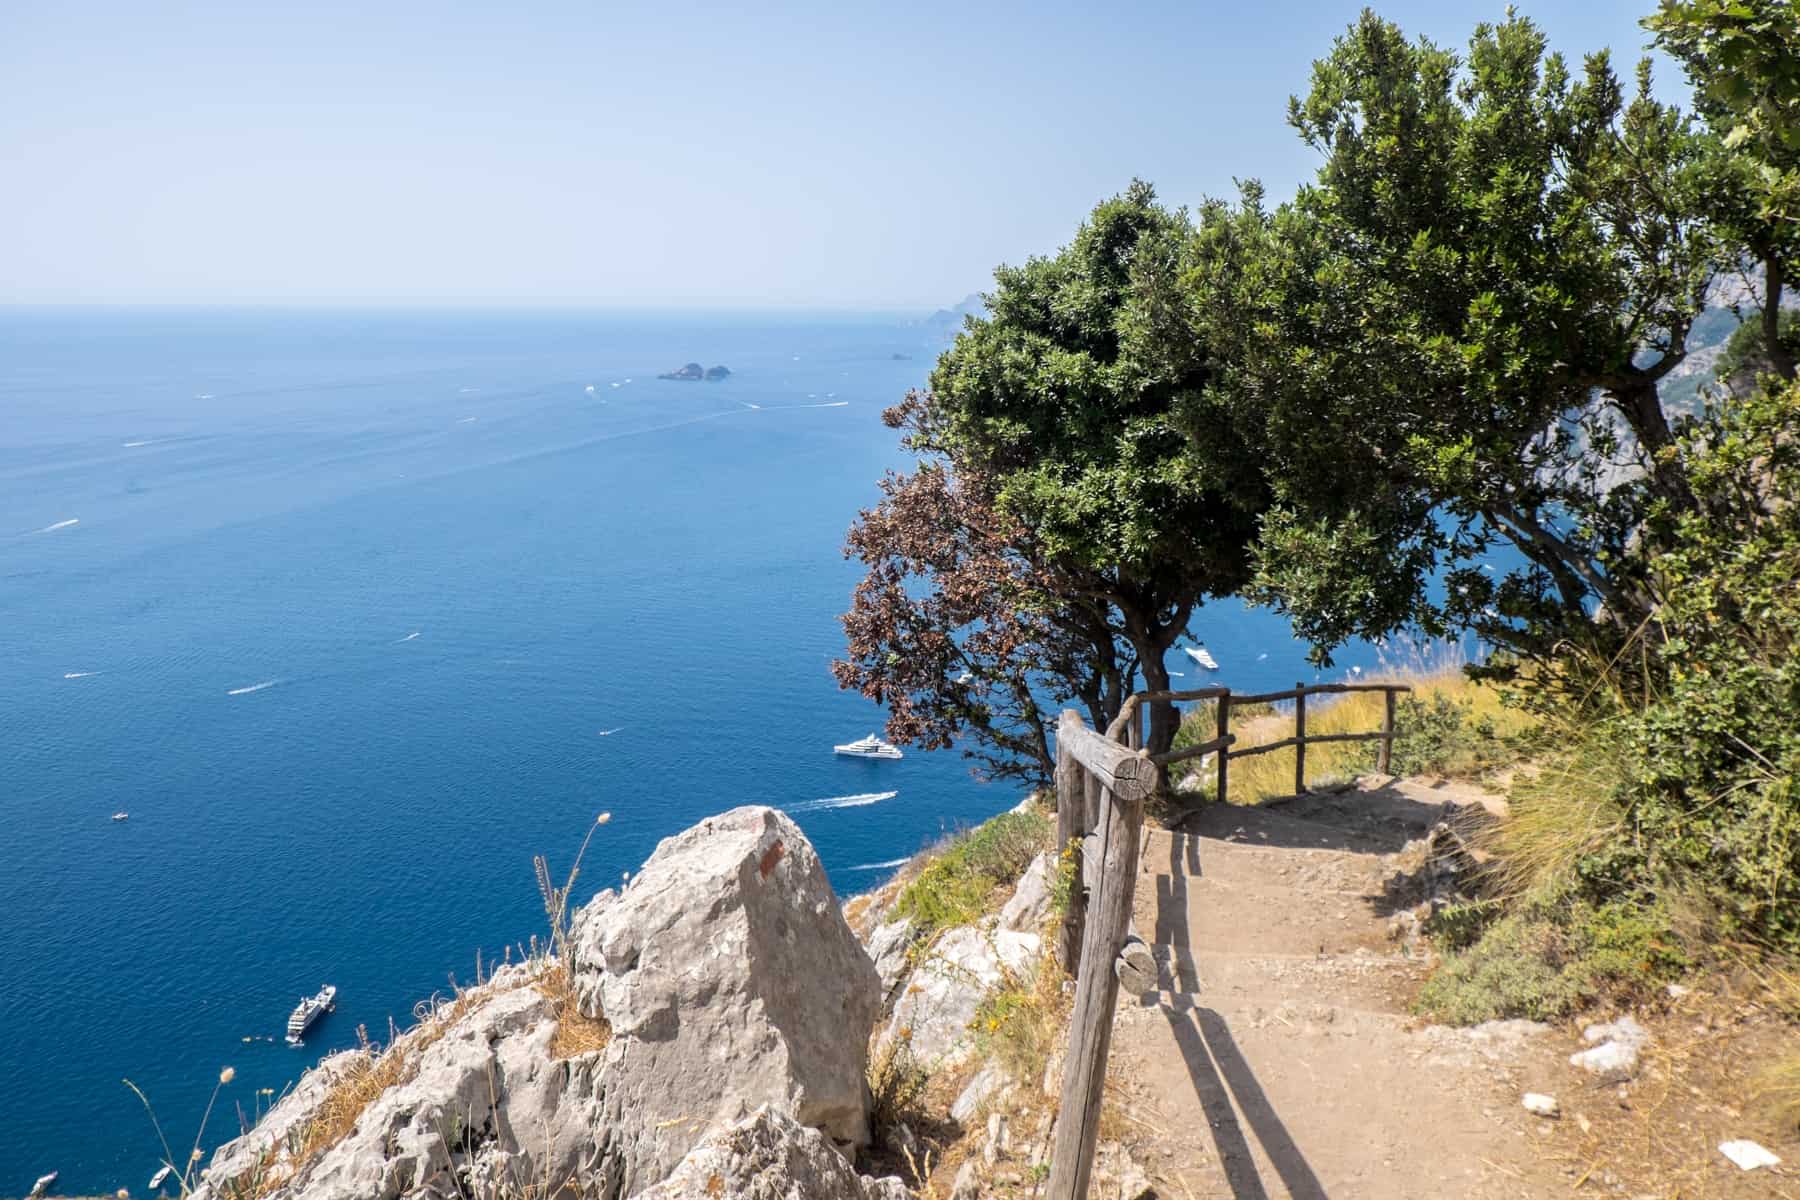 A downhill staircase through trees on the Path of the Gods, overlooking the deep blue sea on the Amalfi Coast.